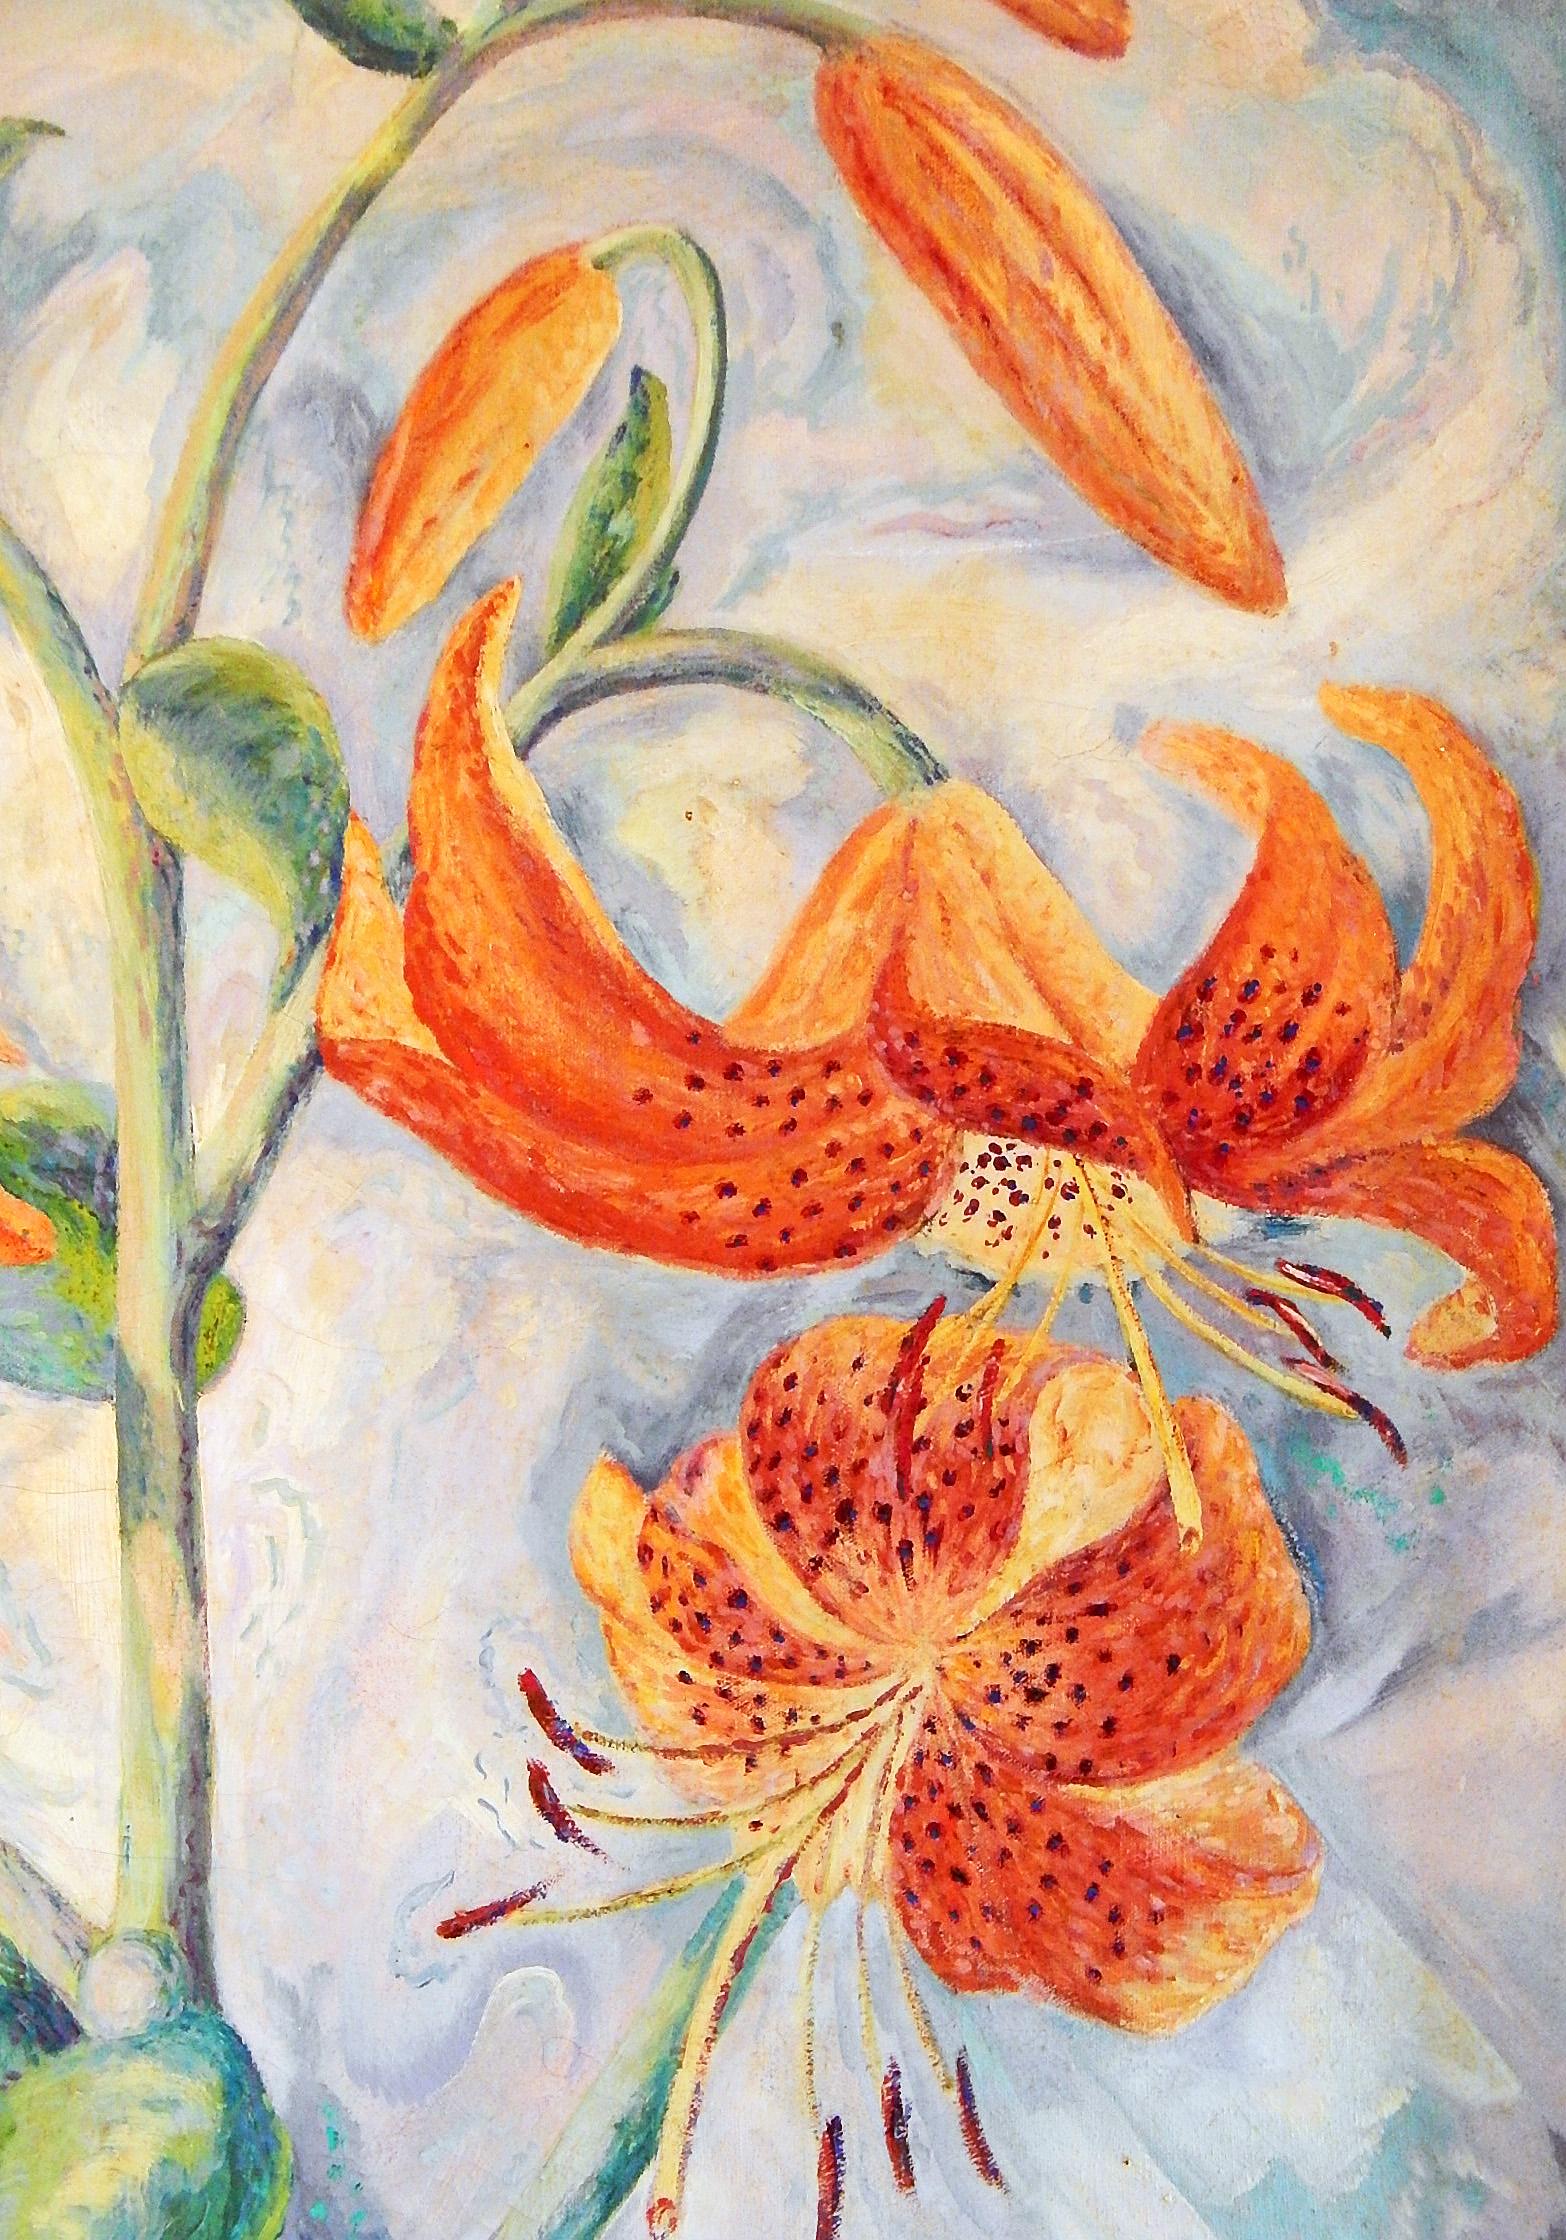 A brilliantly-hued and vivid painting of tiger lilies from the 1930s, this impressionist painting was executed by Simon Maurice Wachtel, a Pennsylvania painter whose works are rare. He painted some canvases for the Works Progress Administration